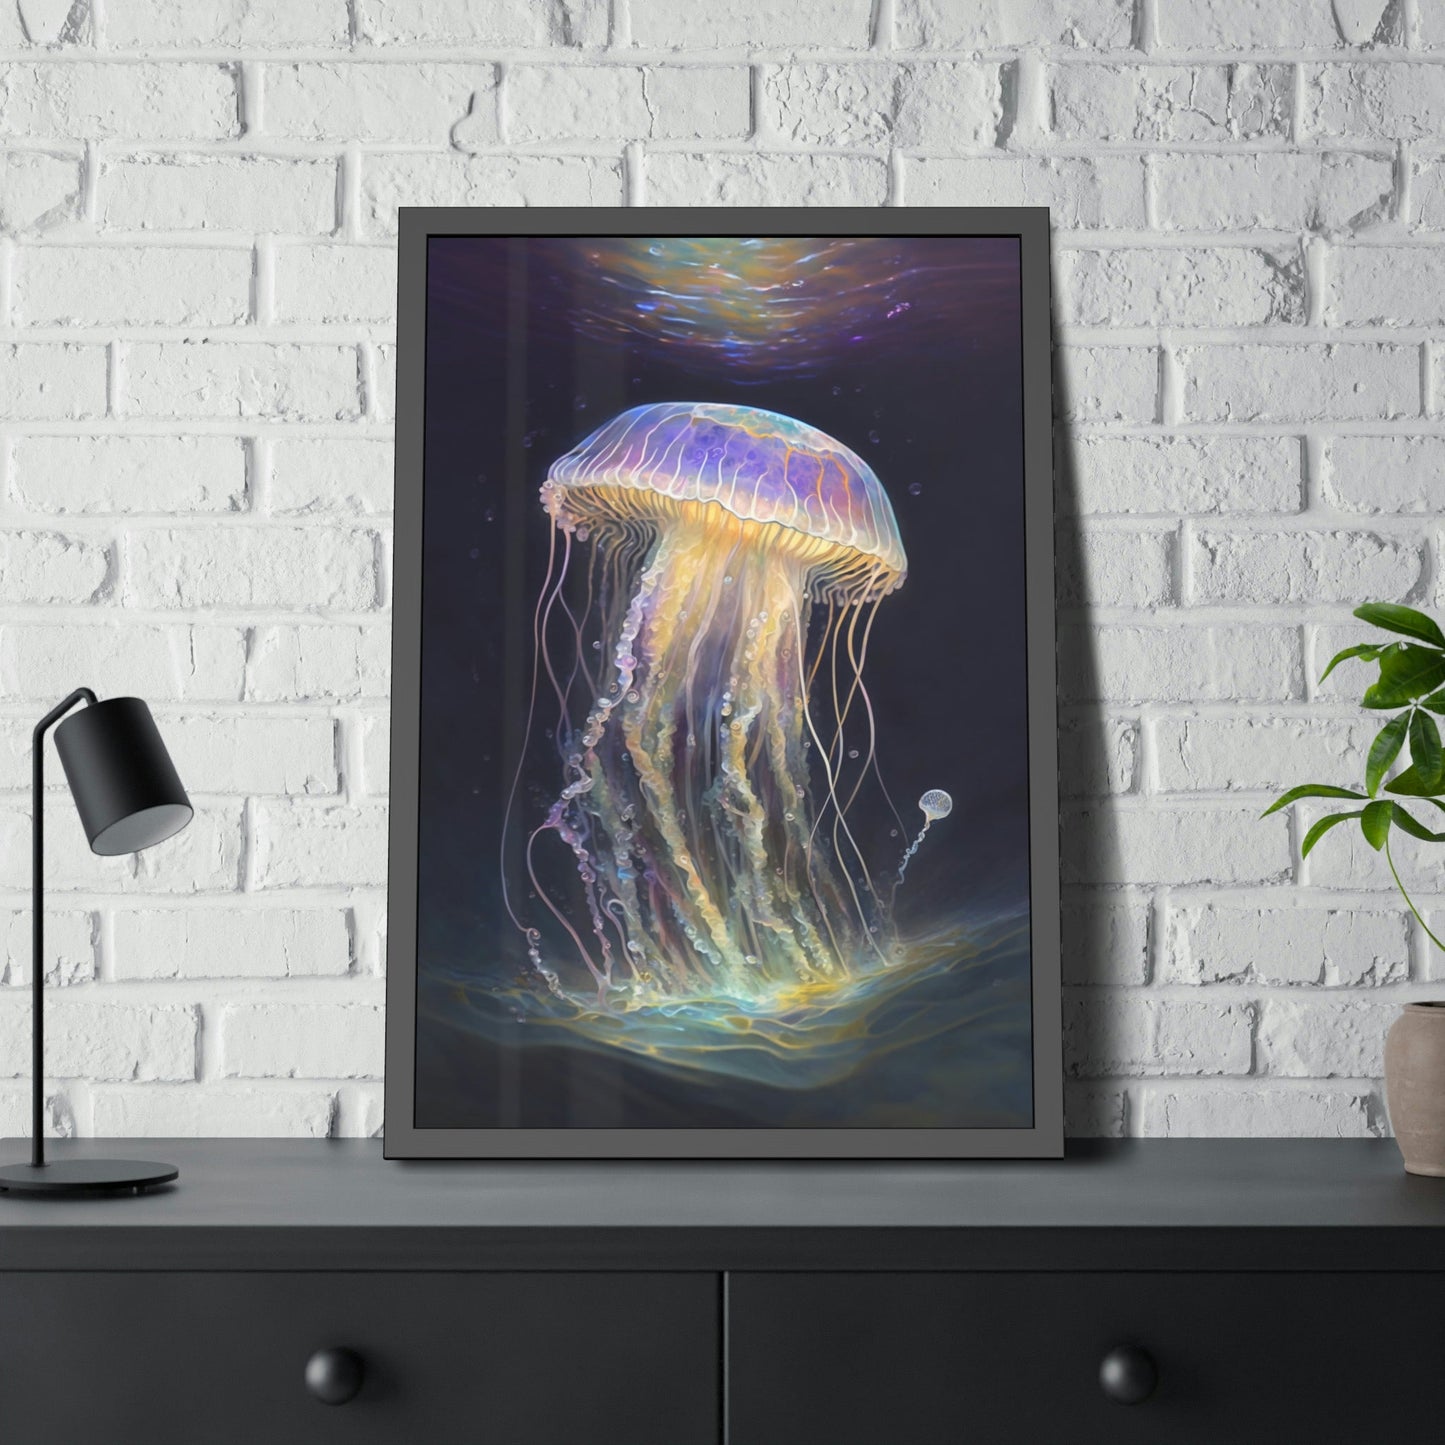 Mesmerizing Ocean Life: Artistic Print on Canvas Featuring Jellyfishes